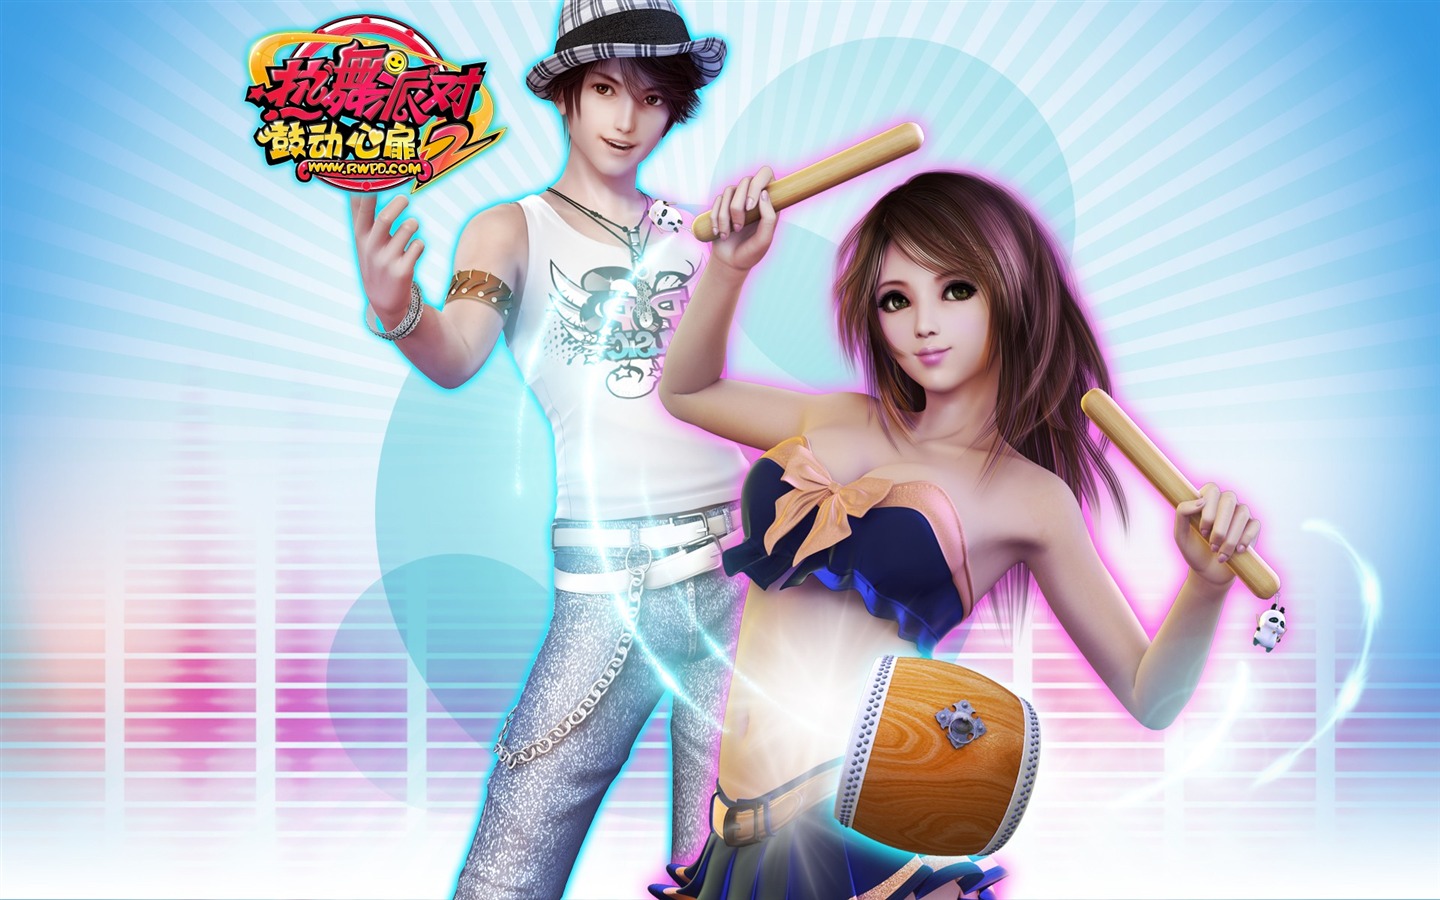 Online game Hot Dance Party II official wallpapers #14 - 1440x900